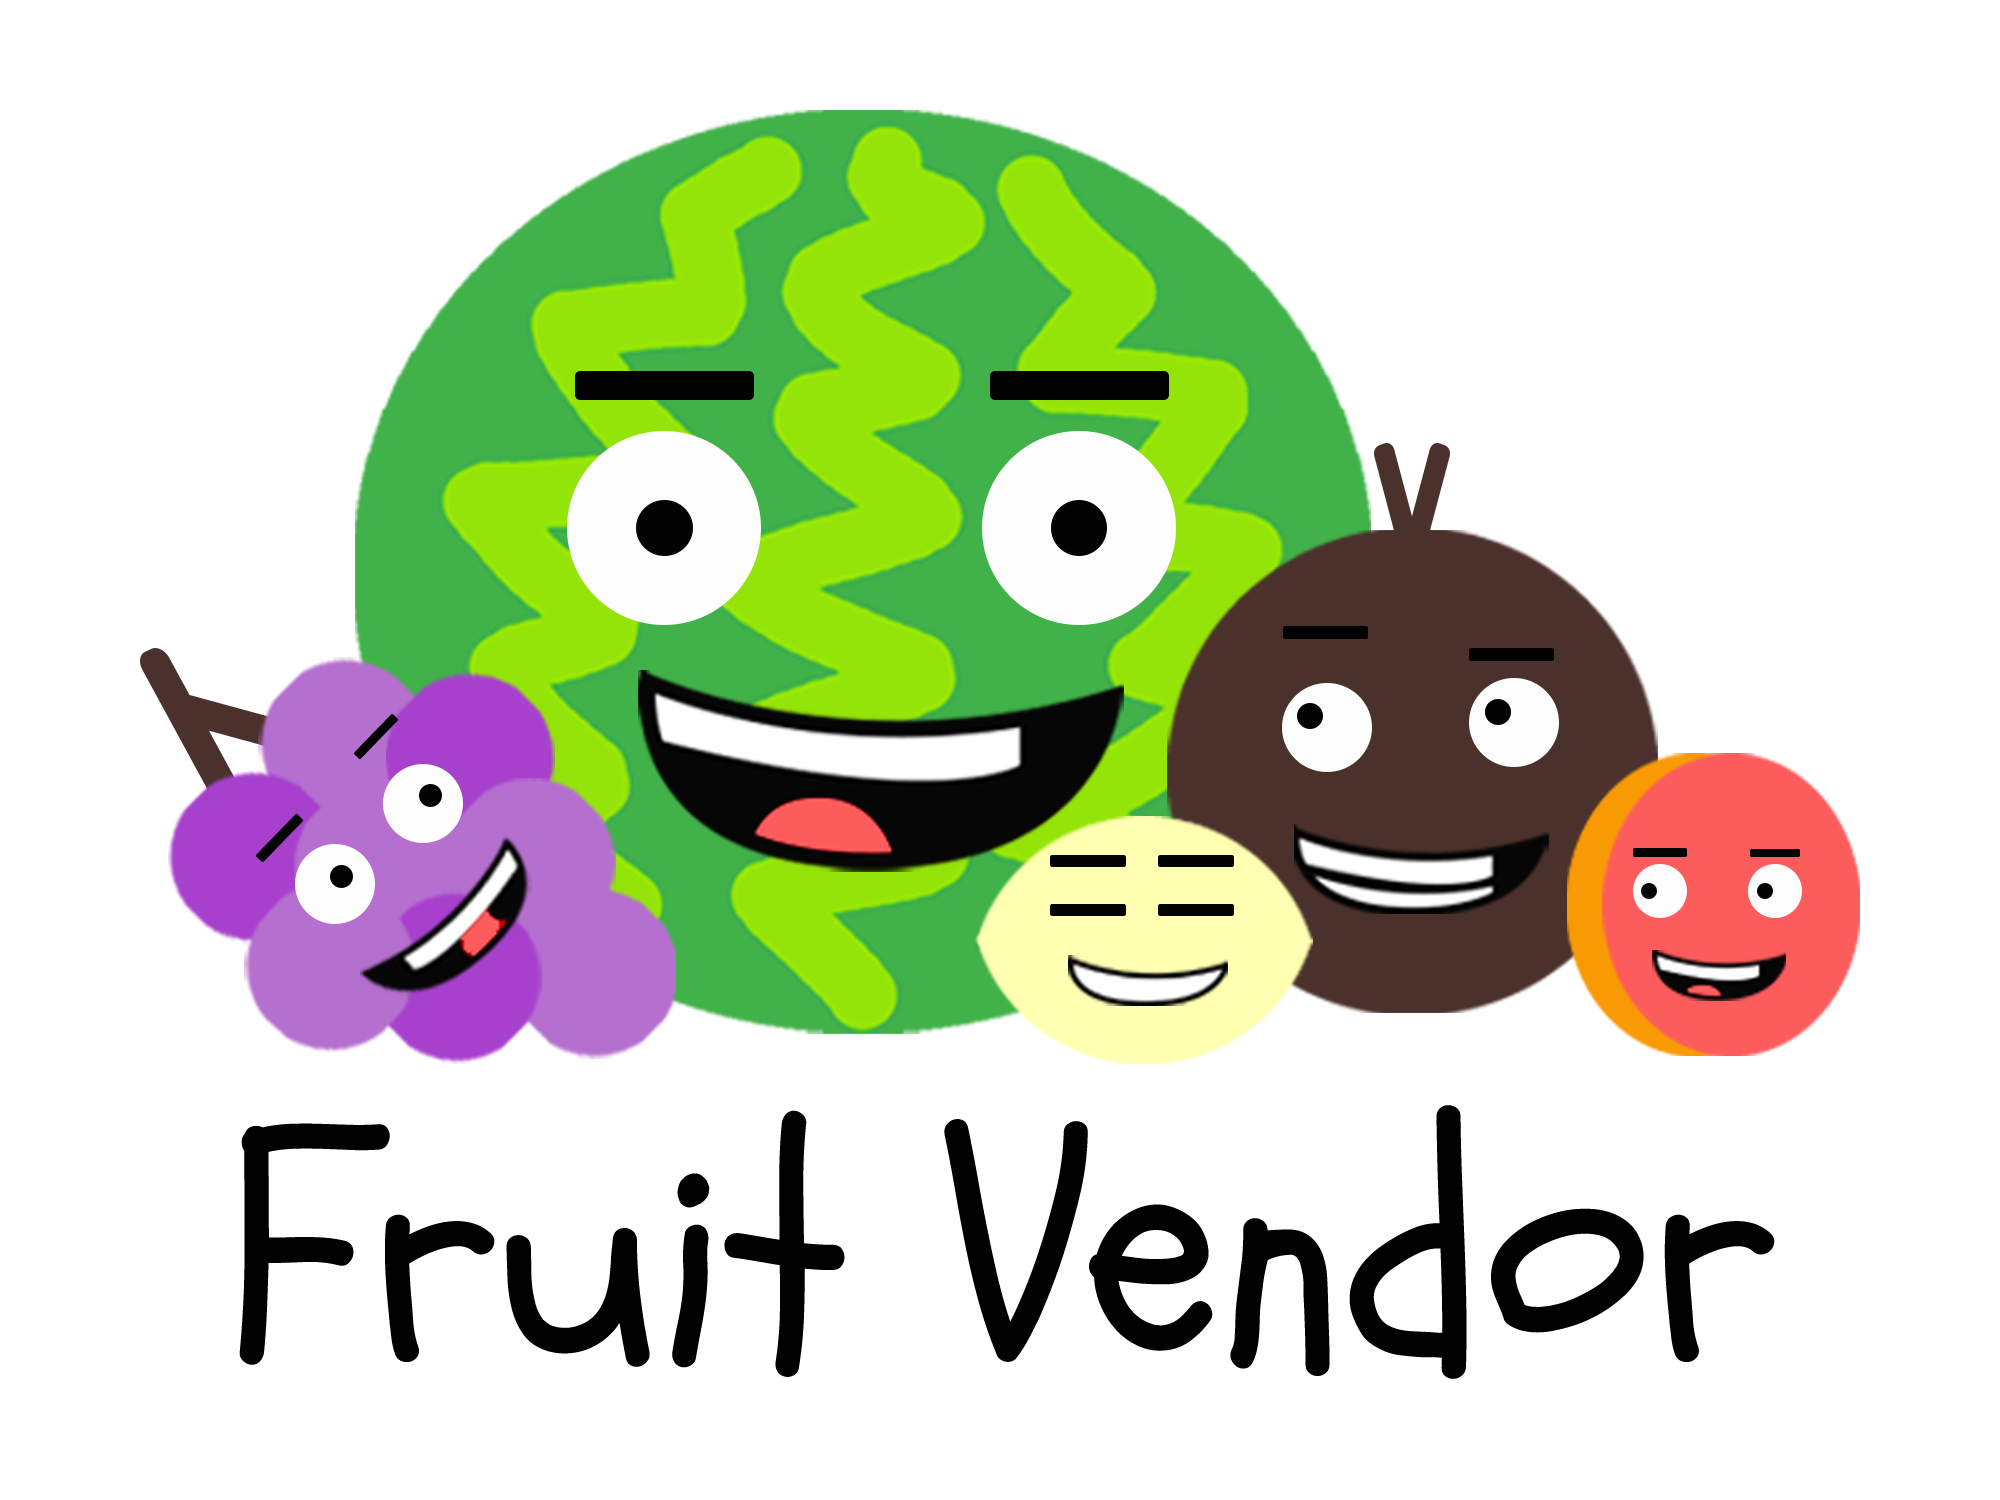 Cartoon fruits (including grapes and a melon) with smiley faces.